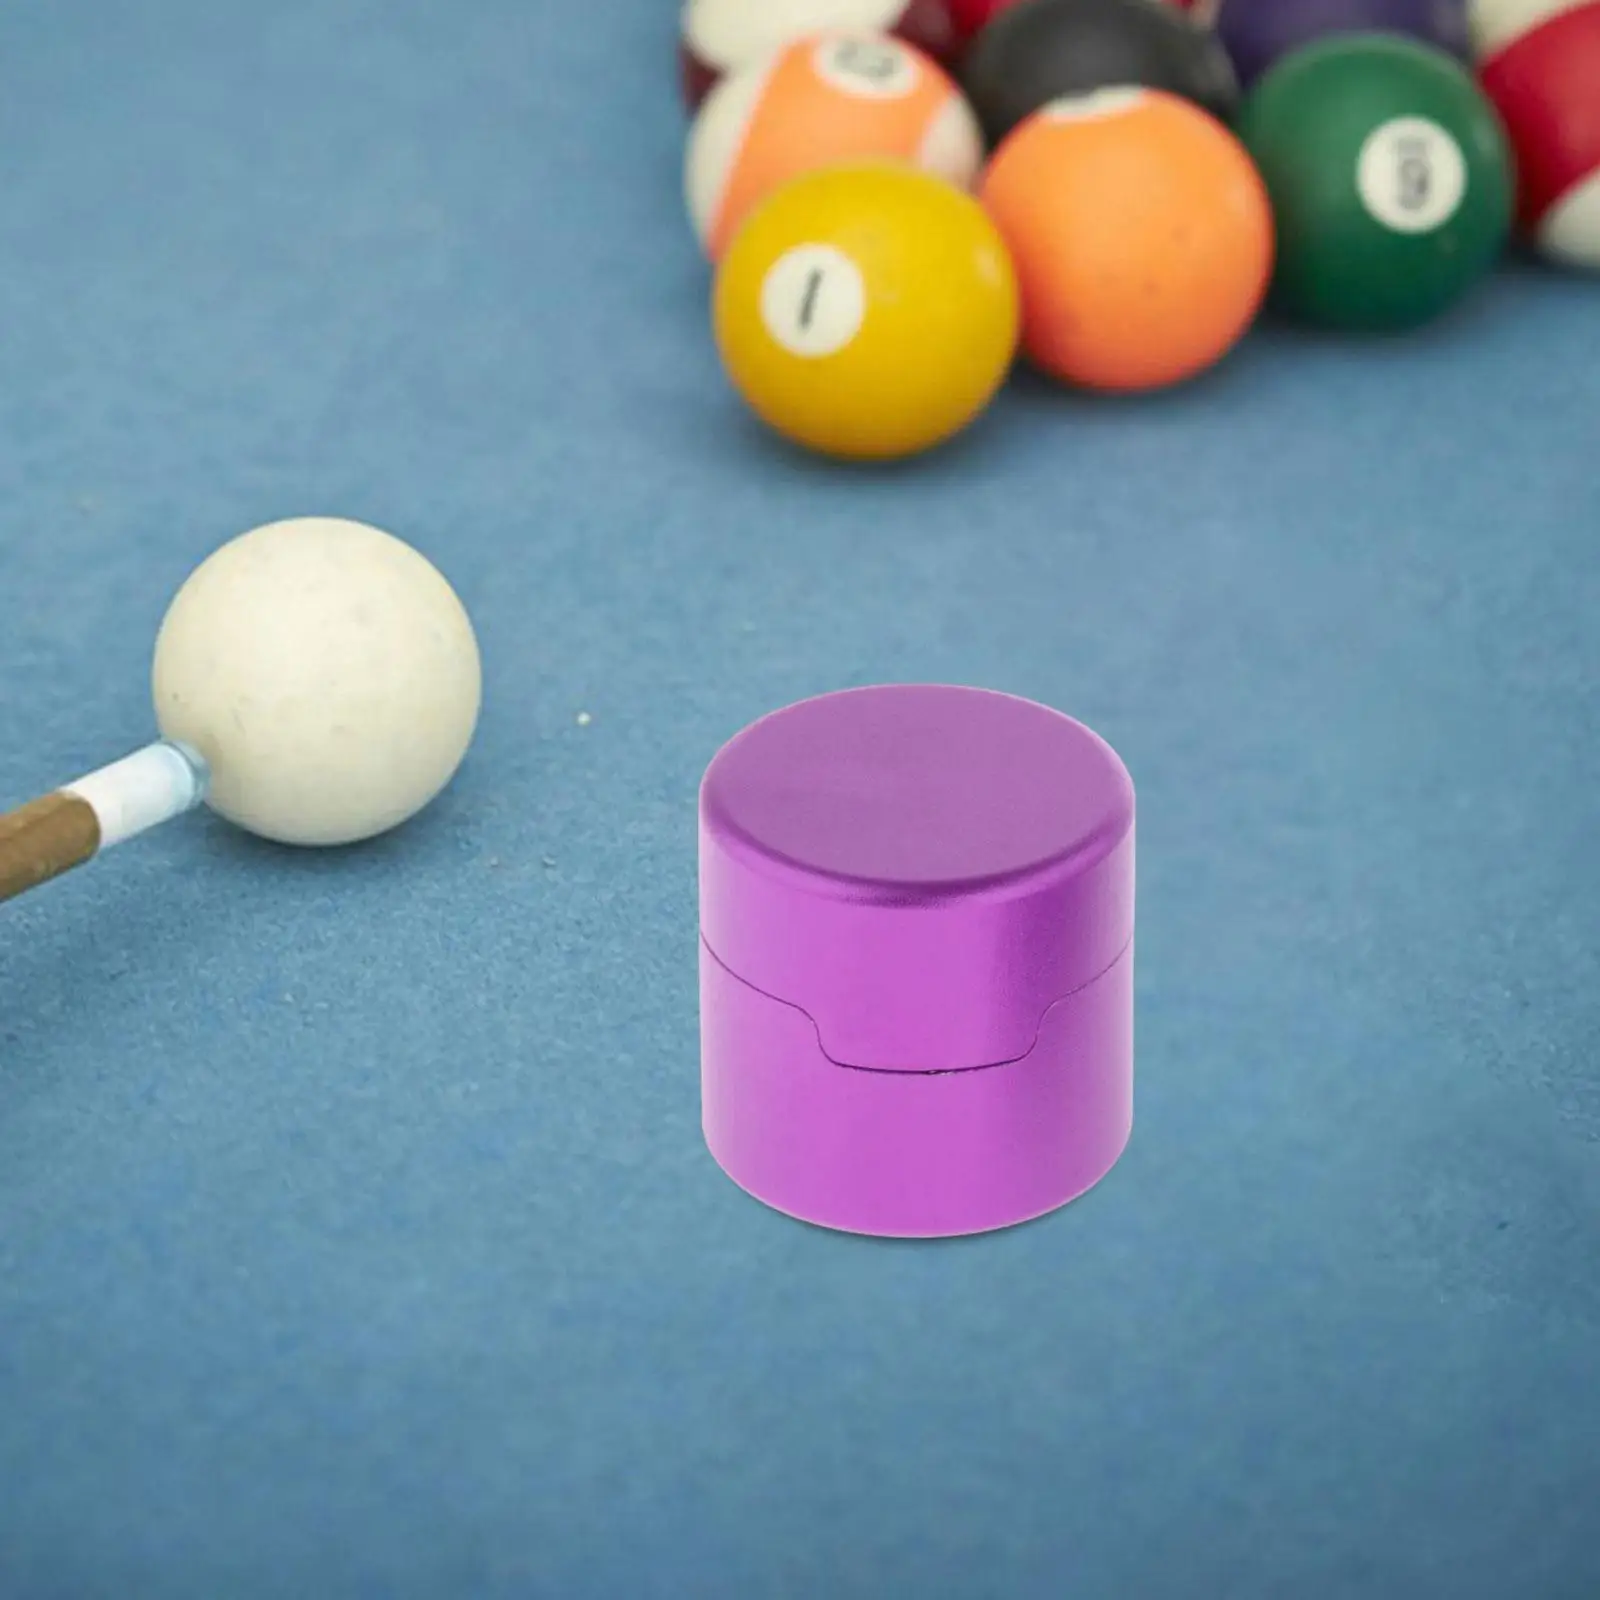 Pool Cue Chalk Holder Snooker Accessories Cup Round Shaped Portable Container